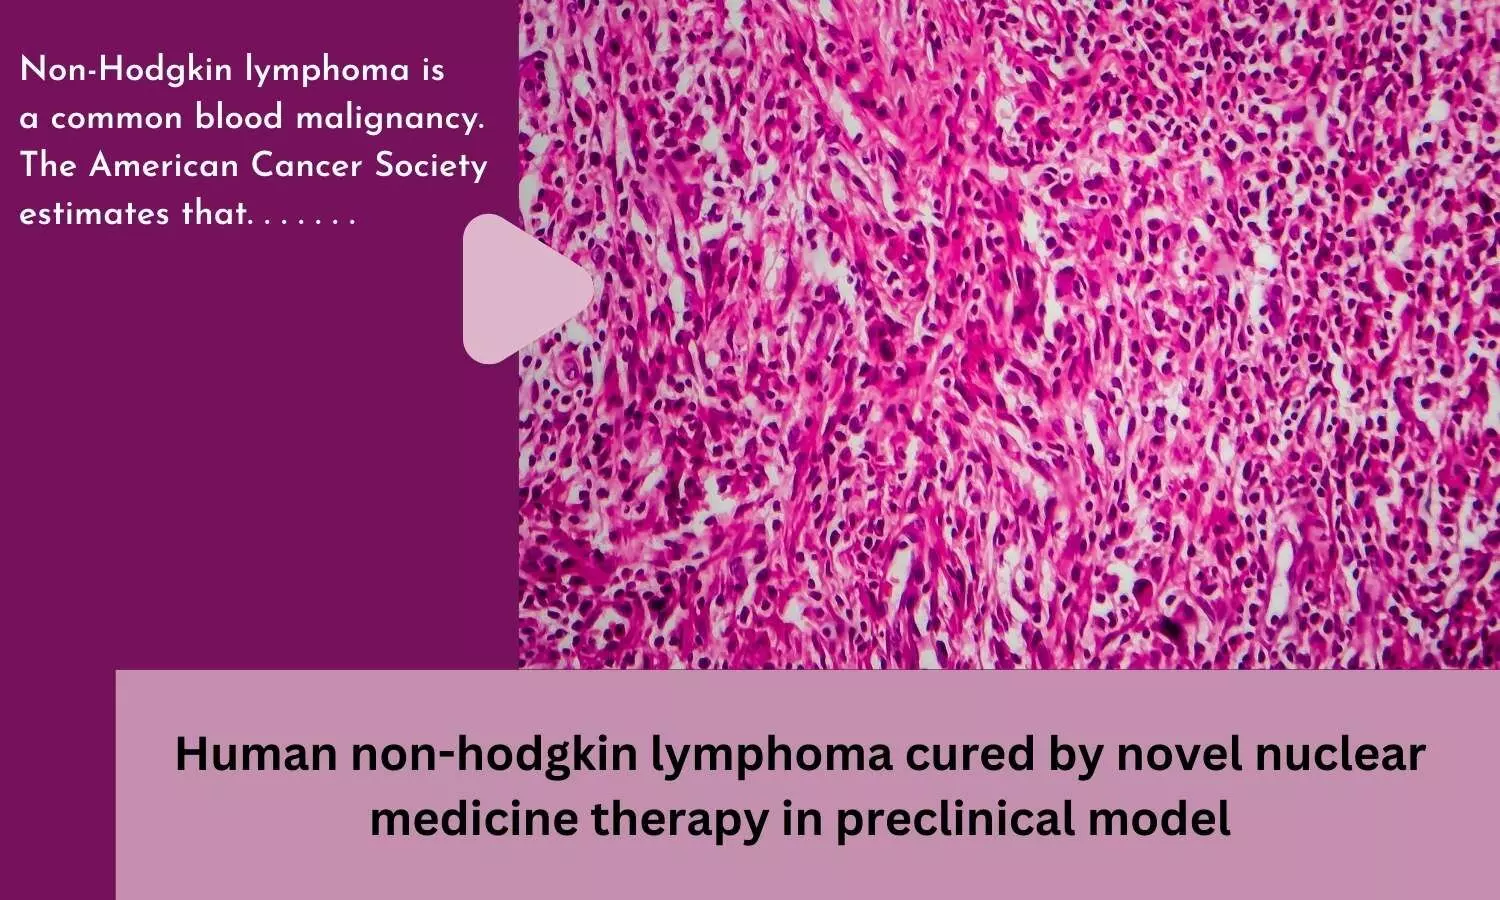 Human non-hodgkin lymphoma cured by novel nuclear medicine therapy in preclinical model